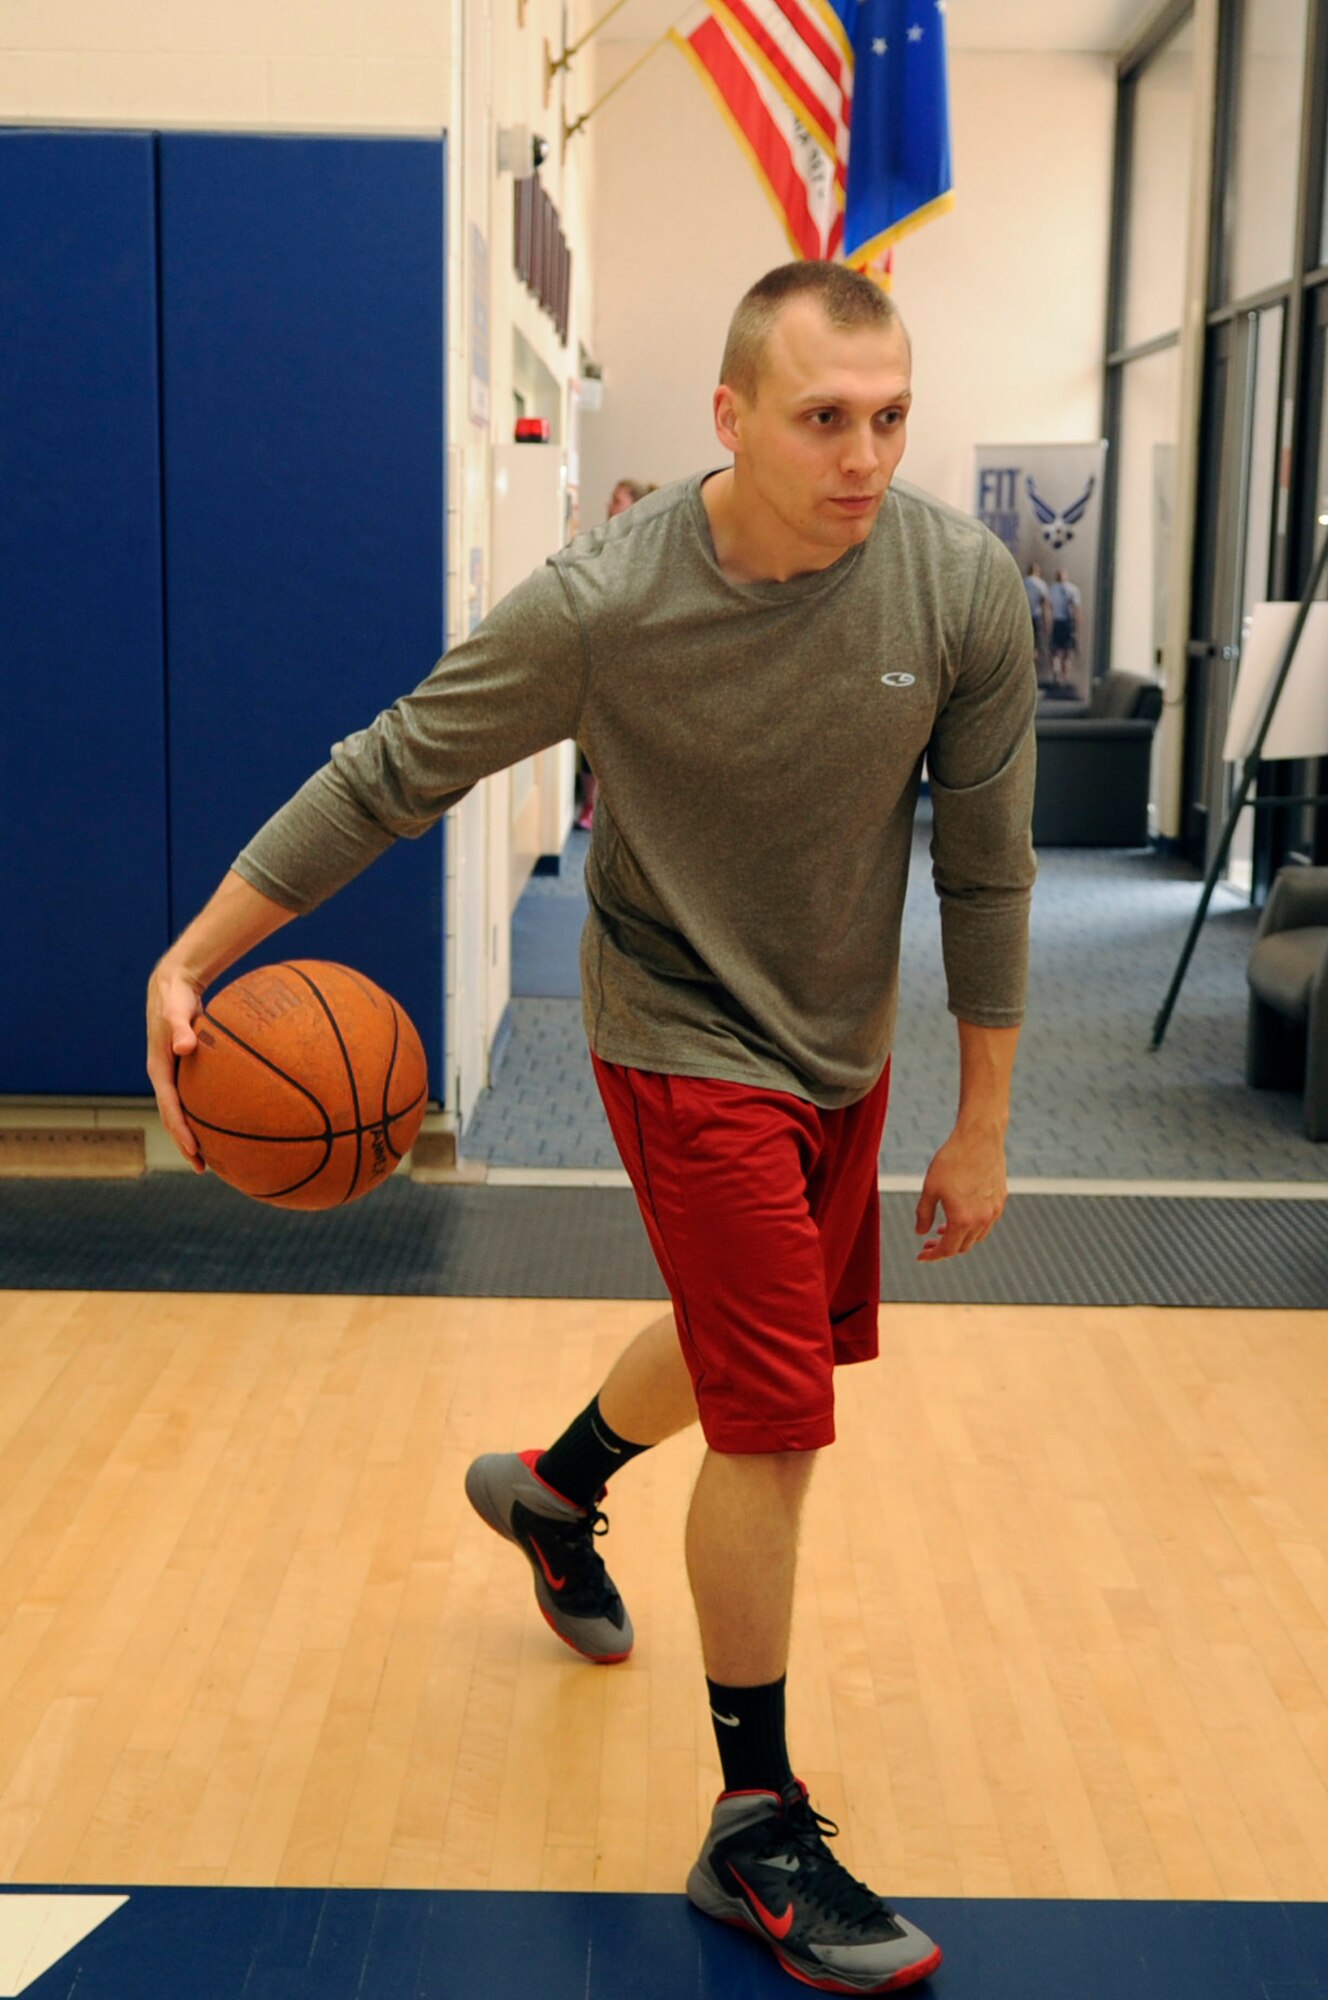 Senior Airman Tyler Cerney, 544th Intelligence, Surveillance and Reconnaissance Group, detachment 1, intelligence analyst, dribbles a basketball, June 29, 2015, Vandenberg Air Force Base, Calif. Through his devotion to bettering the lives of those around him, Cerney has fostered a great deal of pride and respect from his leaders. (U.S. Air Force photo by Senior Airman Shane Phipps/Released)